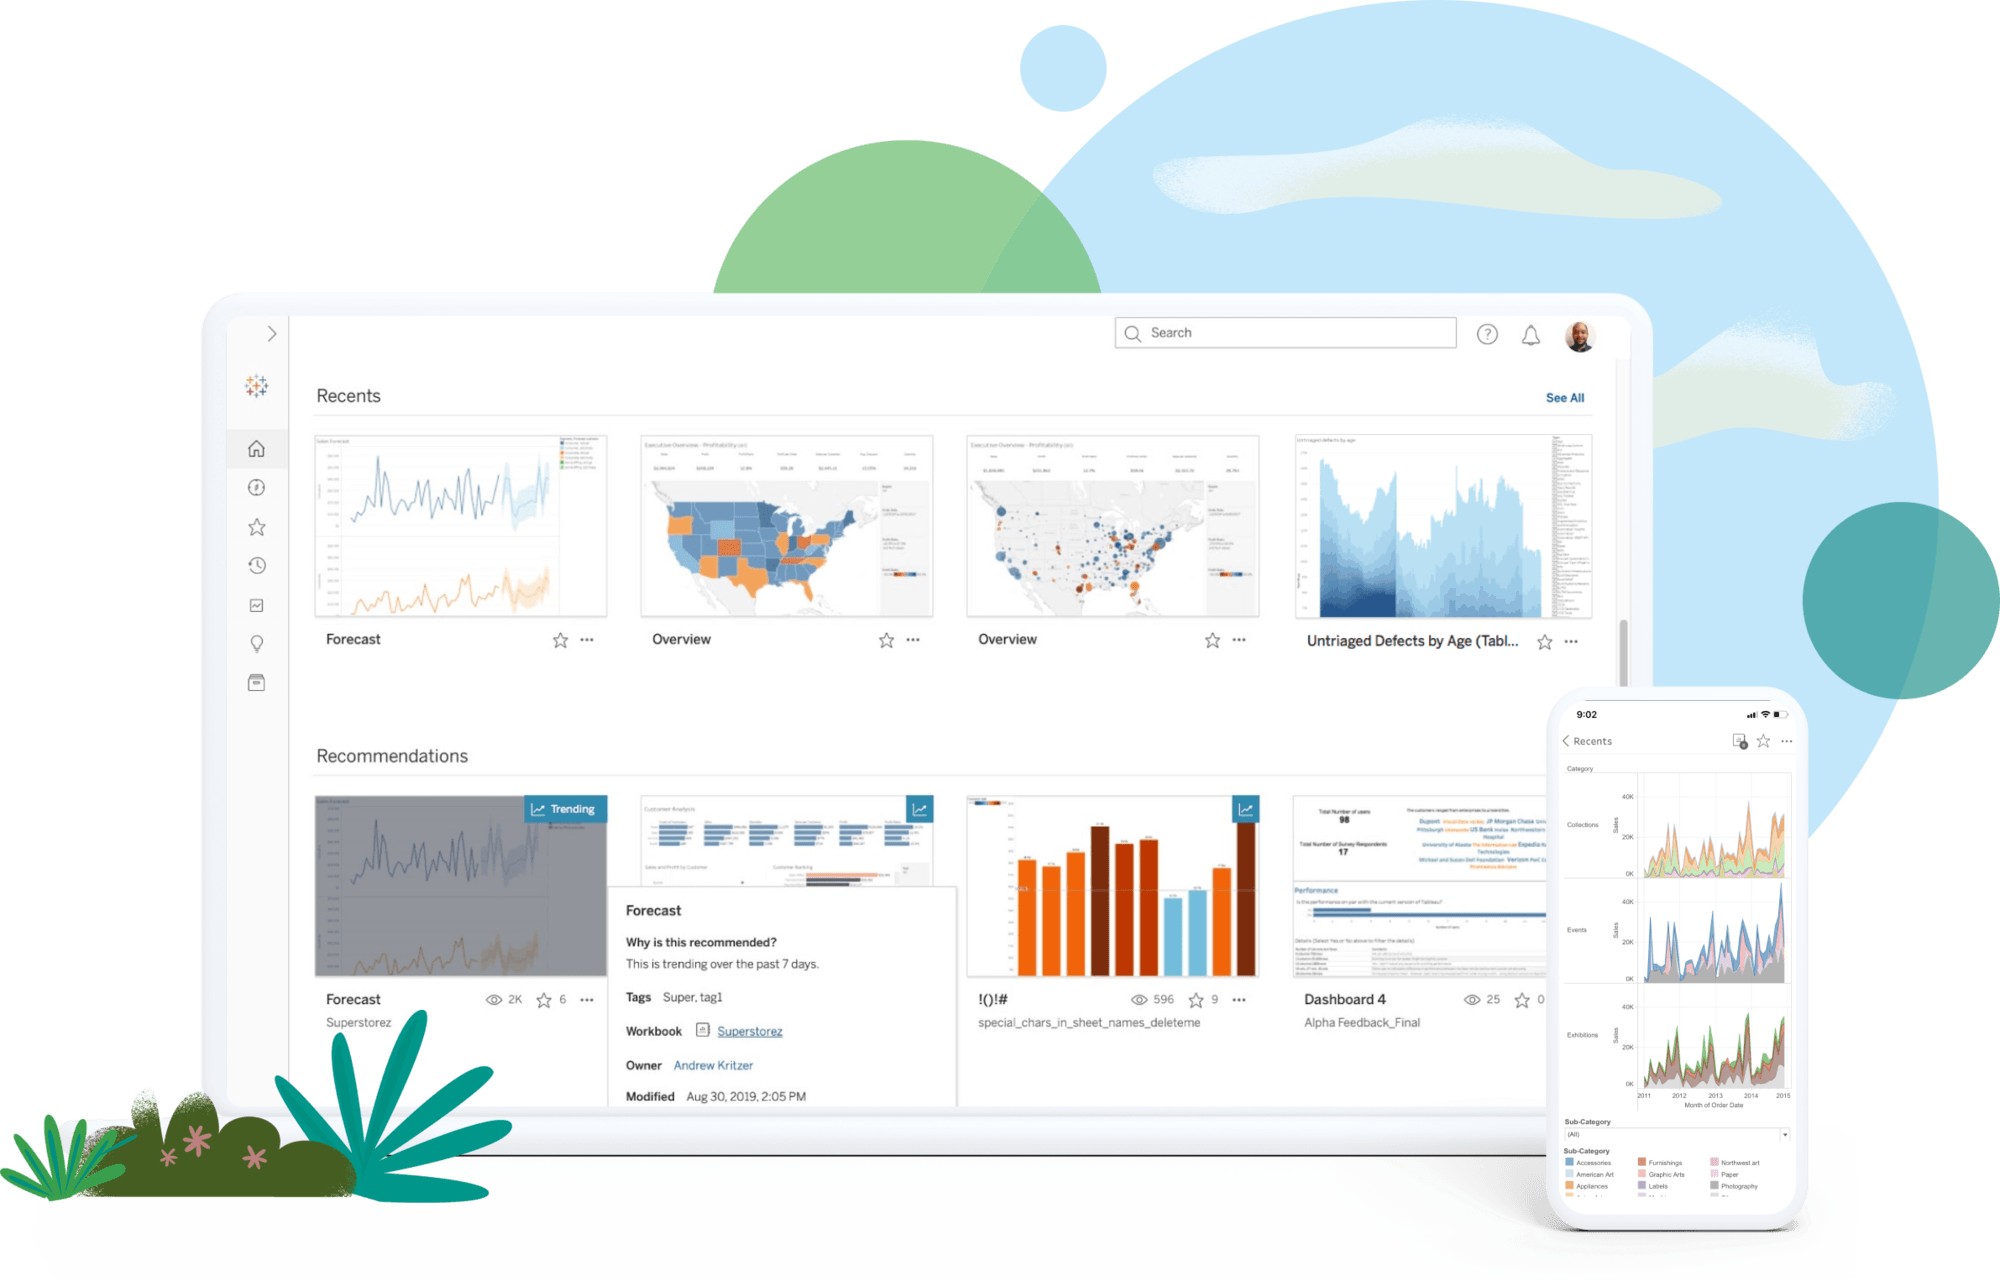 Tableau Data Visualization Software Reviews & Features